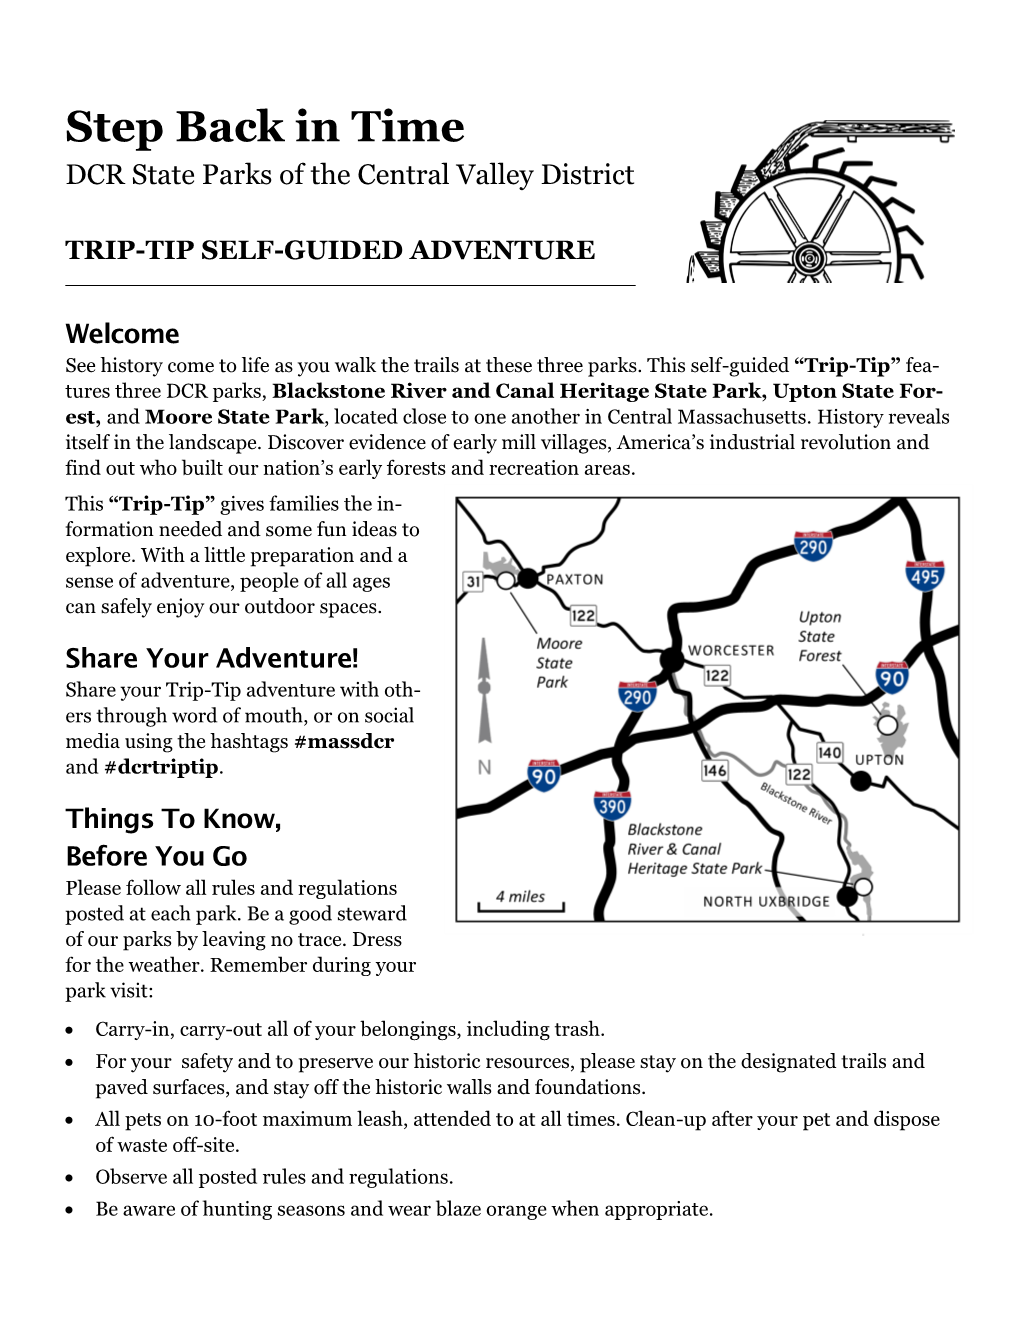 Trip Tip Explore the Central Valley